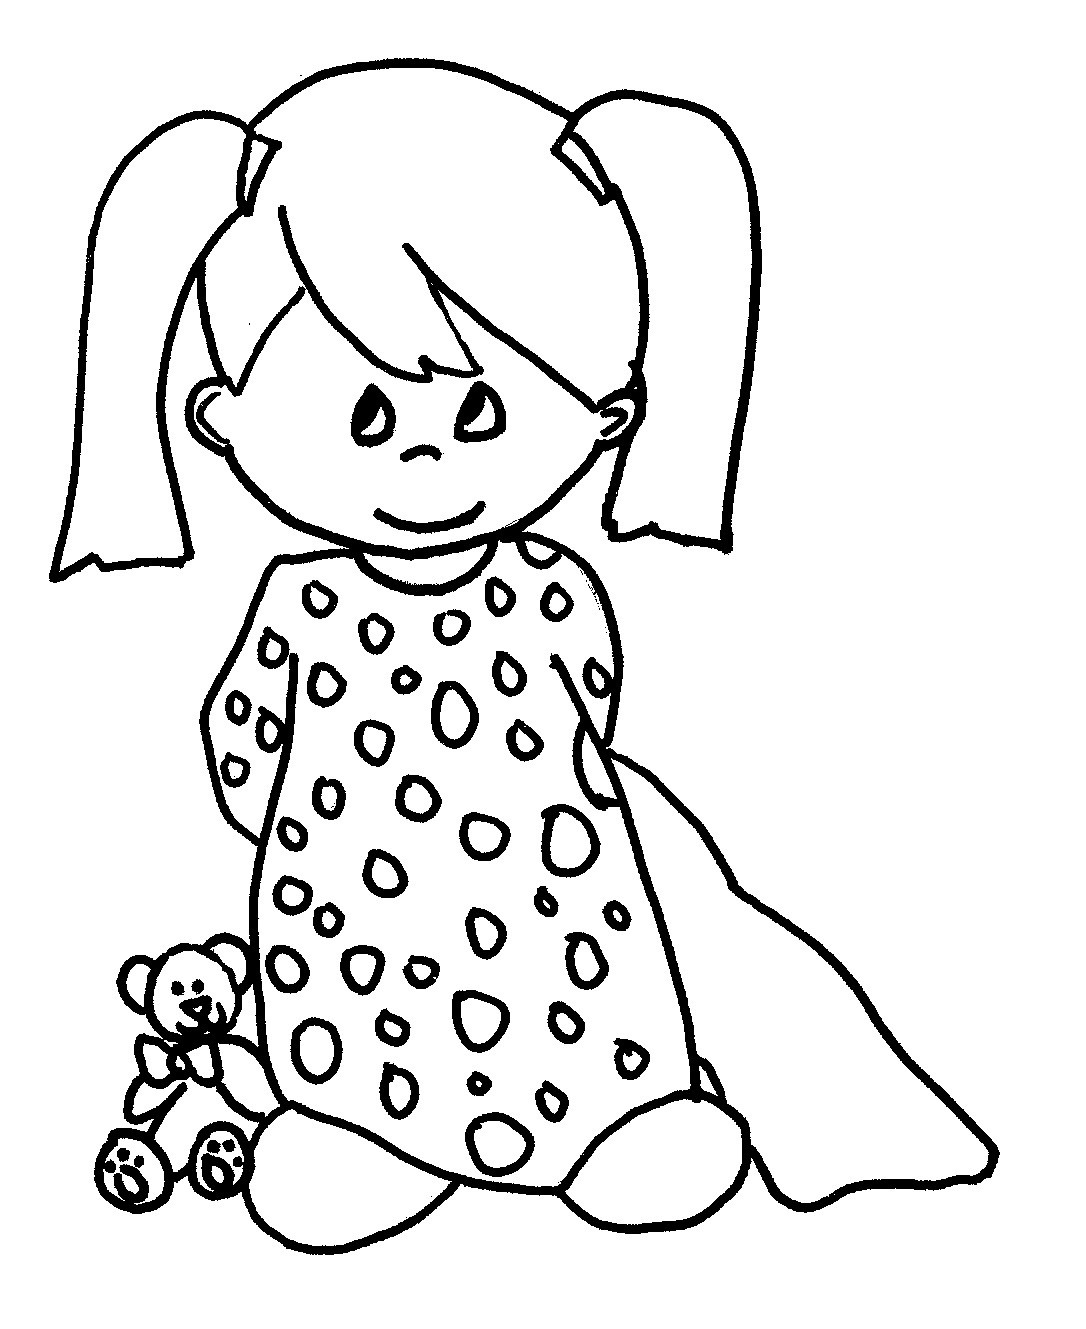 Coloring Sheets For Girls To Prin
 Free Printable Baby Coloring Pages For Kids